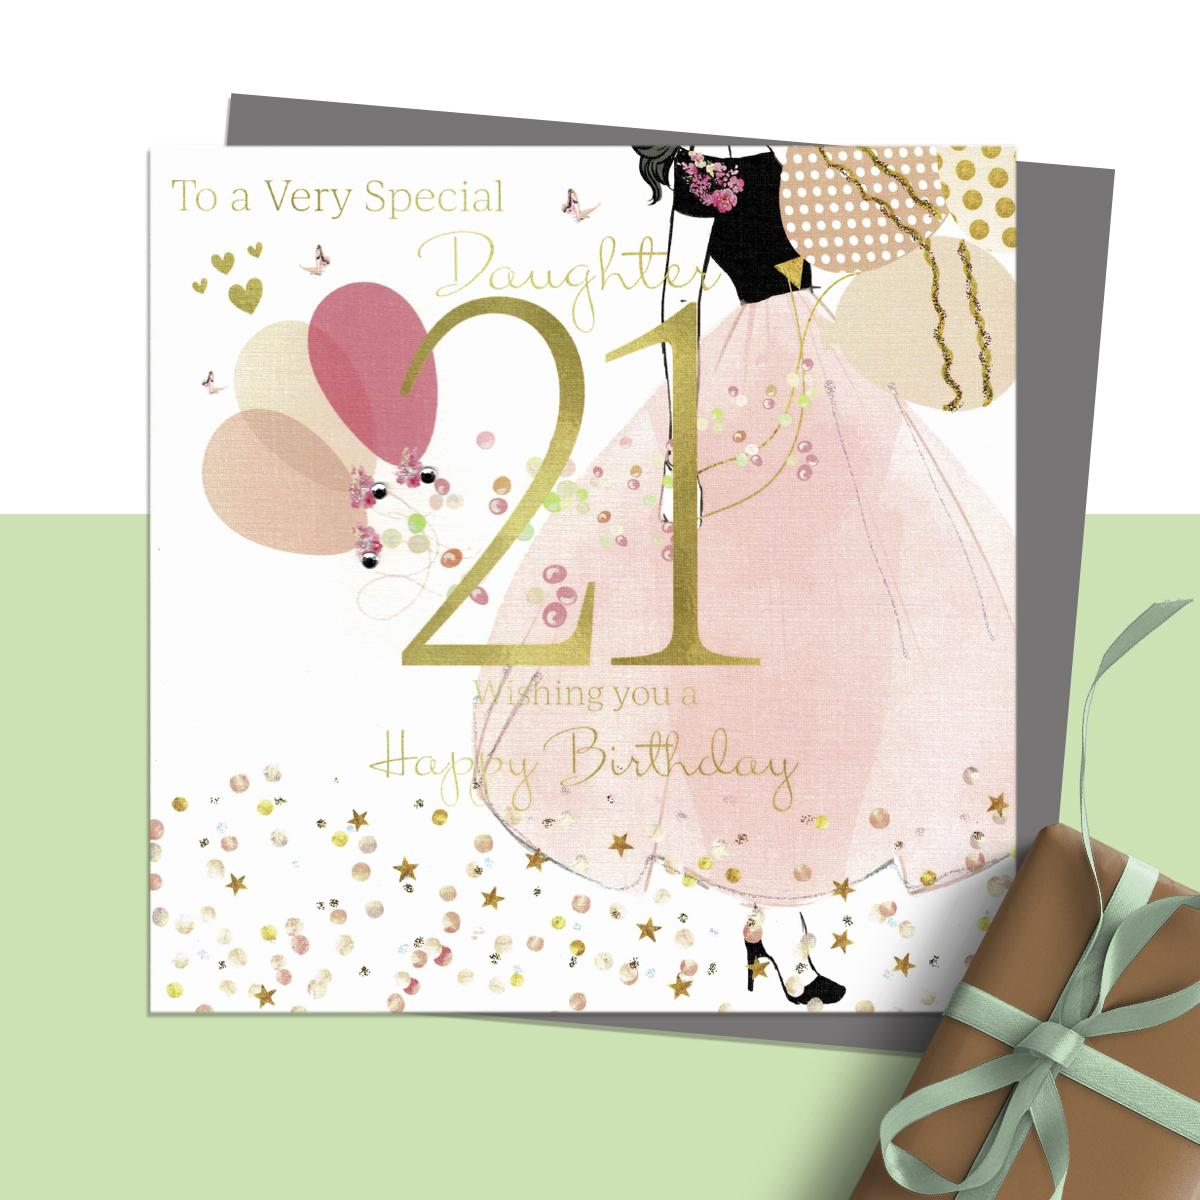 To A Very Special Daughter 21 Wishing You A Happy Birthday ' Featuring A Girl in A Large Skirted Dress And Balloons. Hand Finished With Sparkle And Jewel Embellishments. Blank Inside For Own Message. Complete With Silver Coloured Envelope